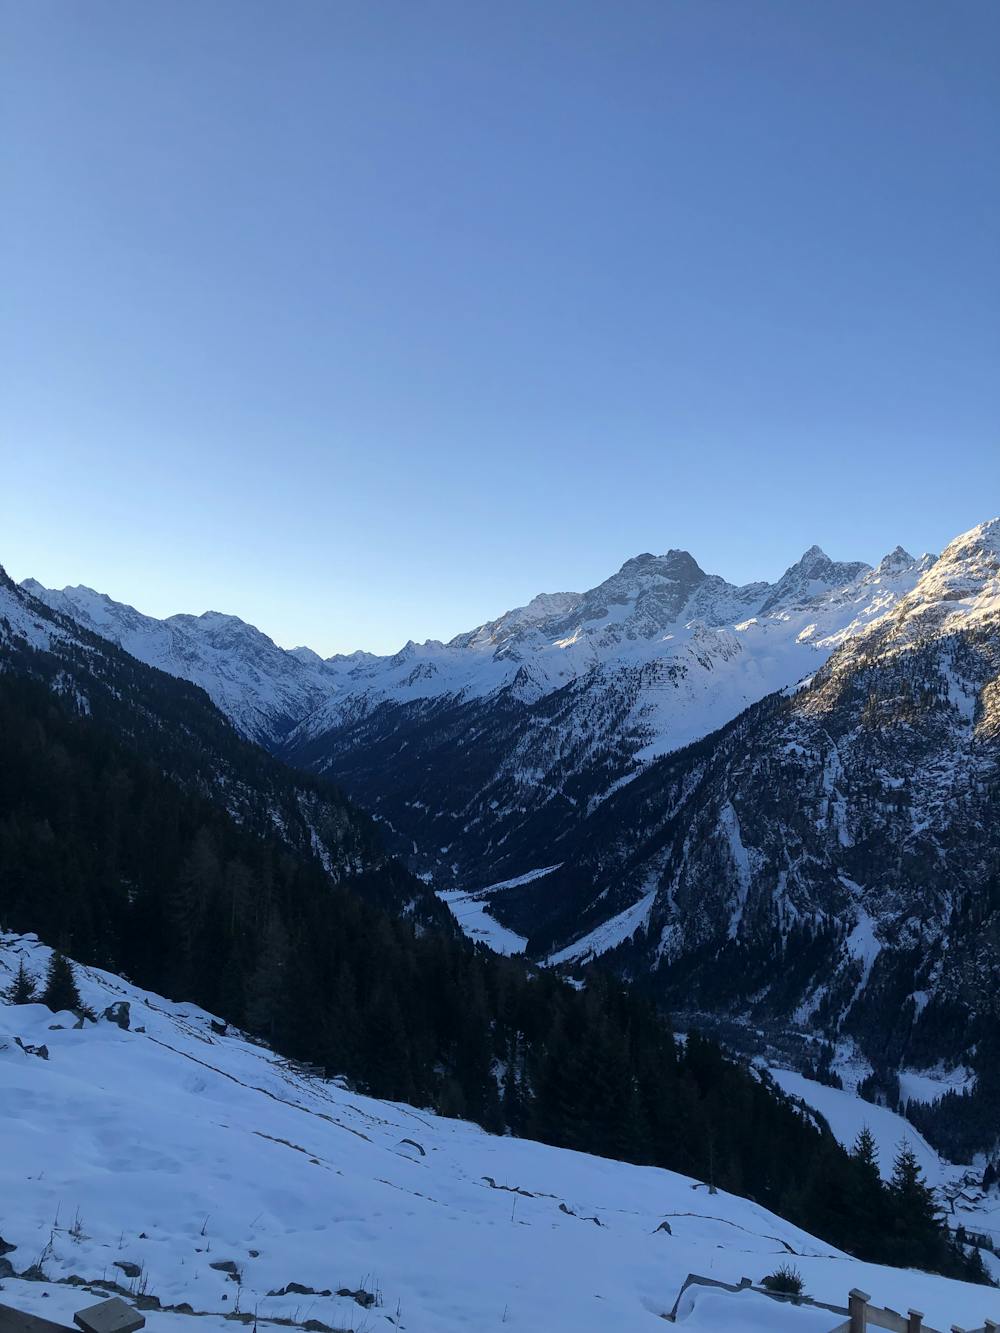 View towards the end of the valley and the Pitztal glacier ski area